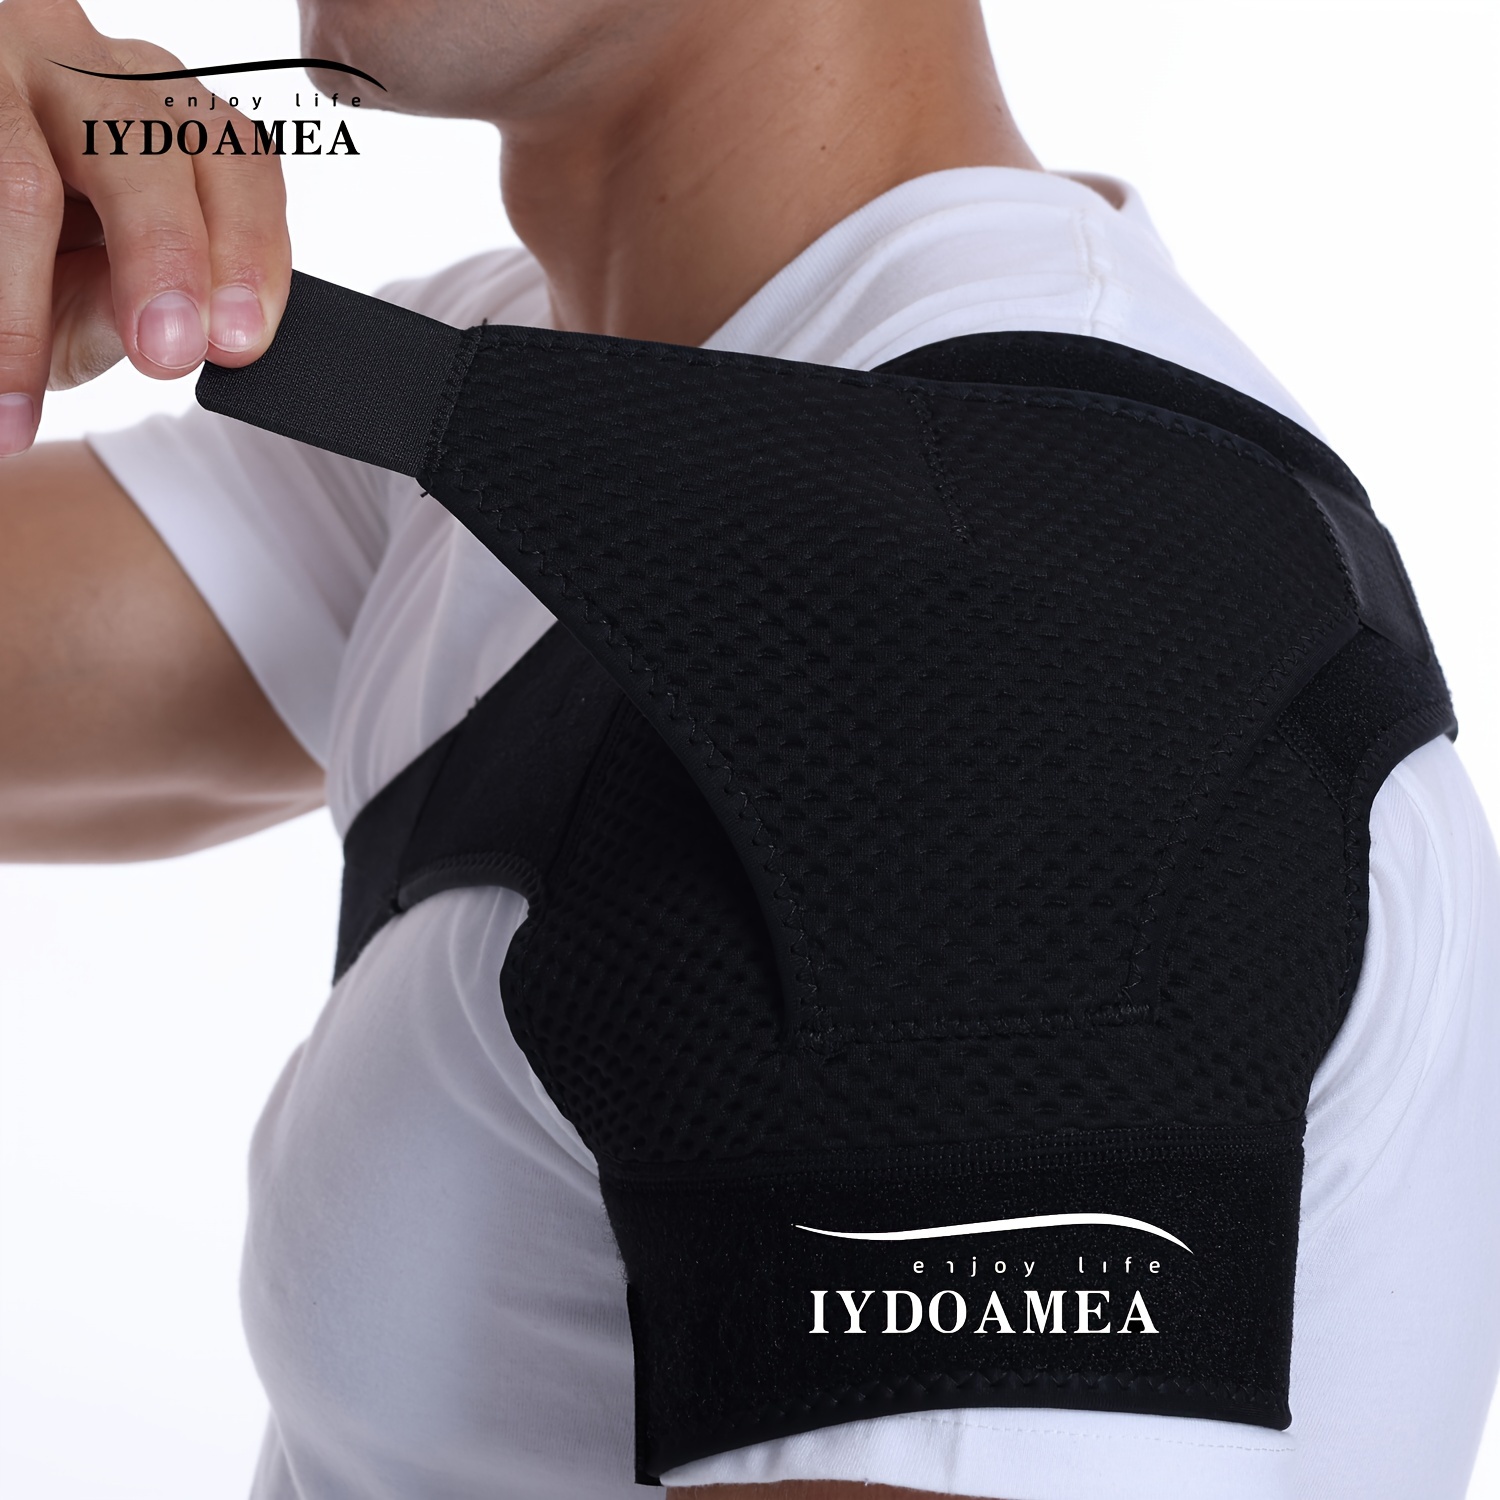 1pc Shoulder Brace For Torn Rotator Cuff, Shoulder Relieve Fatigue, Support  And Compression - Sleeve Wrap For Shoulder Stability And Recovery - Fits L